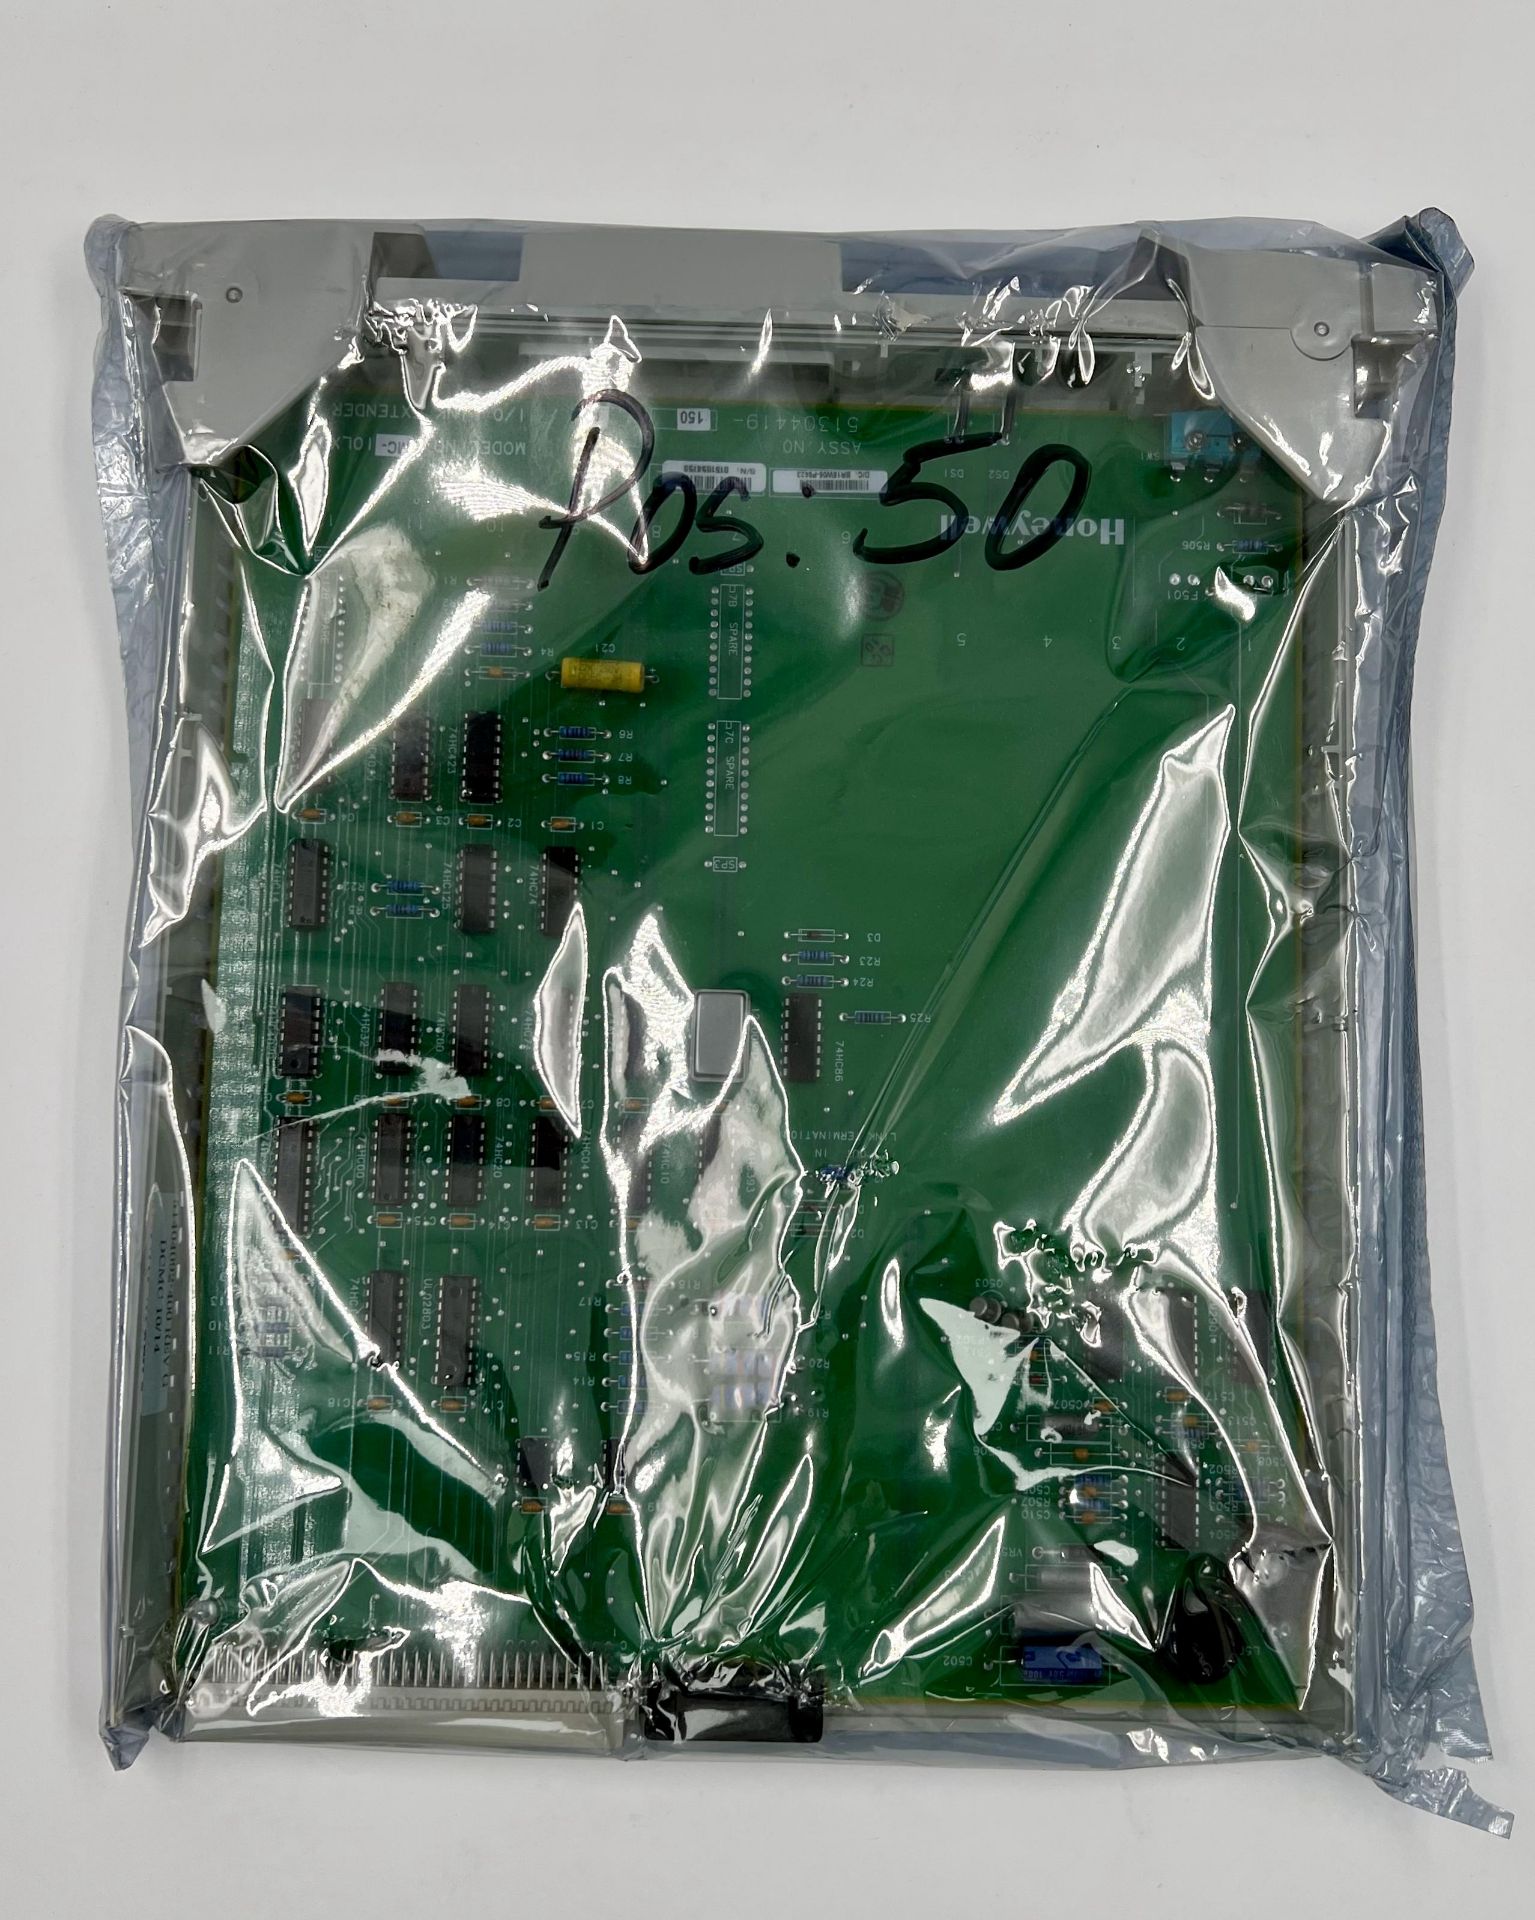 A pre-ownedHoneywell MC-IOLX02 I/O Link Extender Card (P/N: 51304419-150*E ) (Packaging sealed).